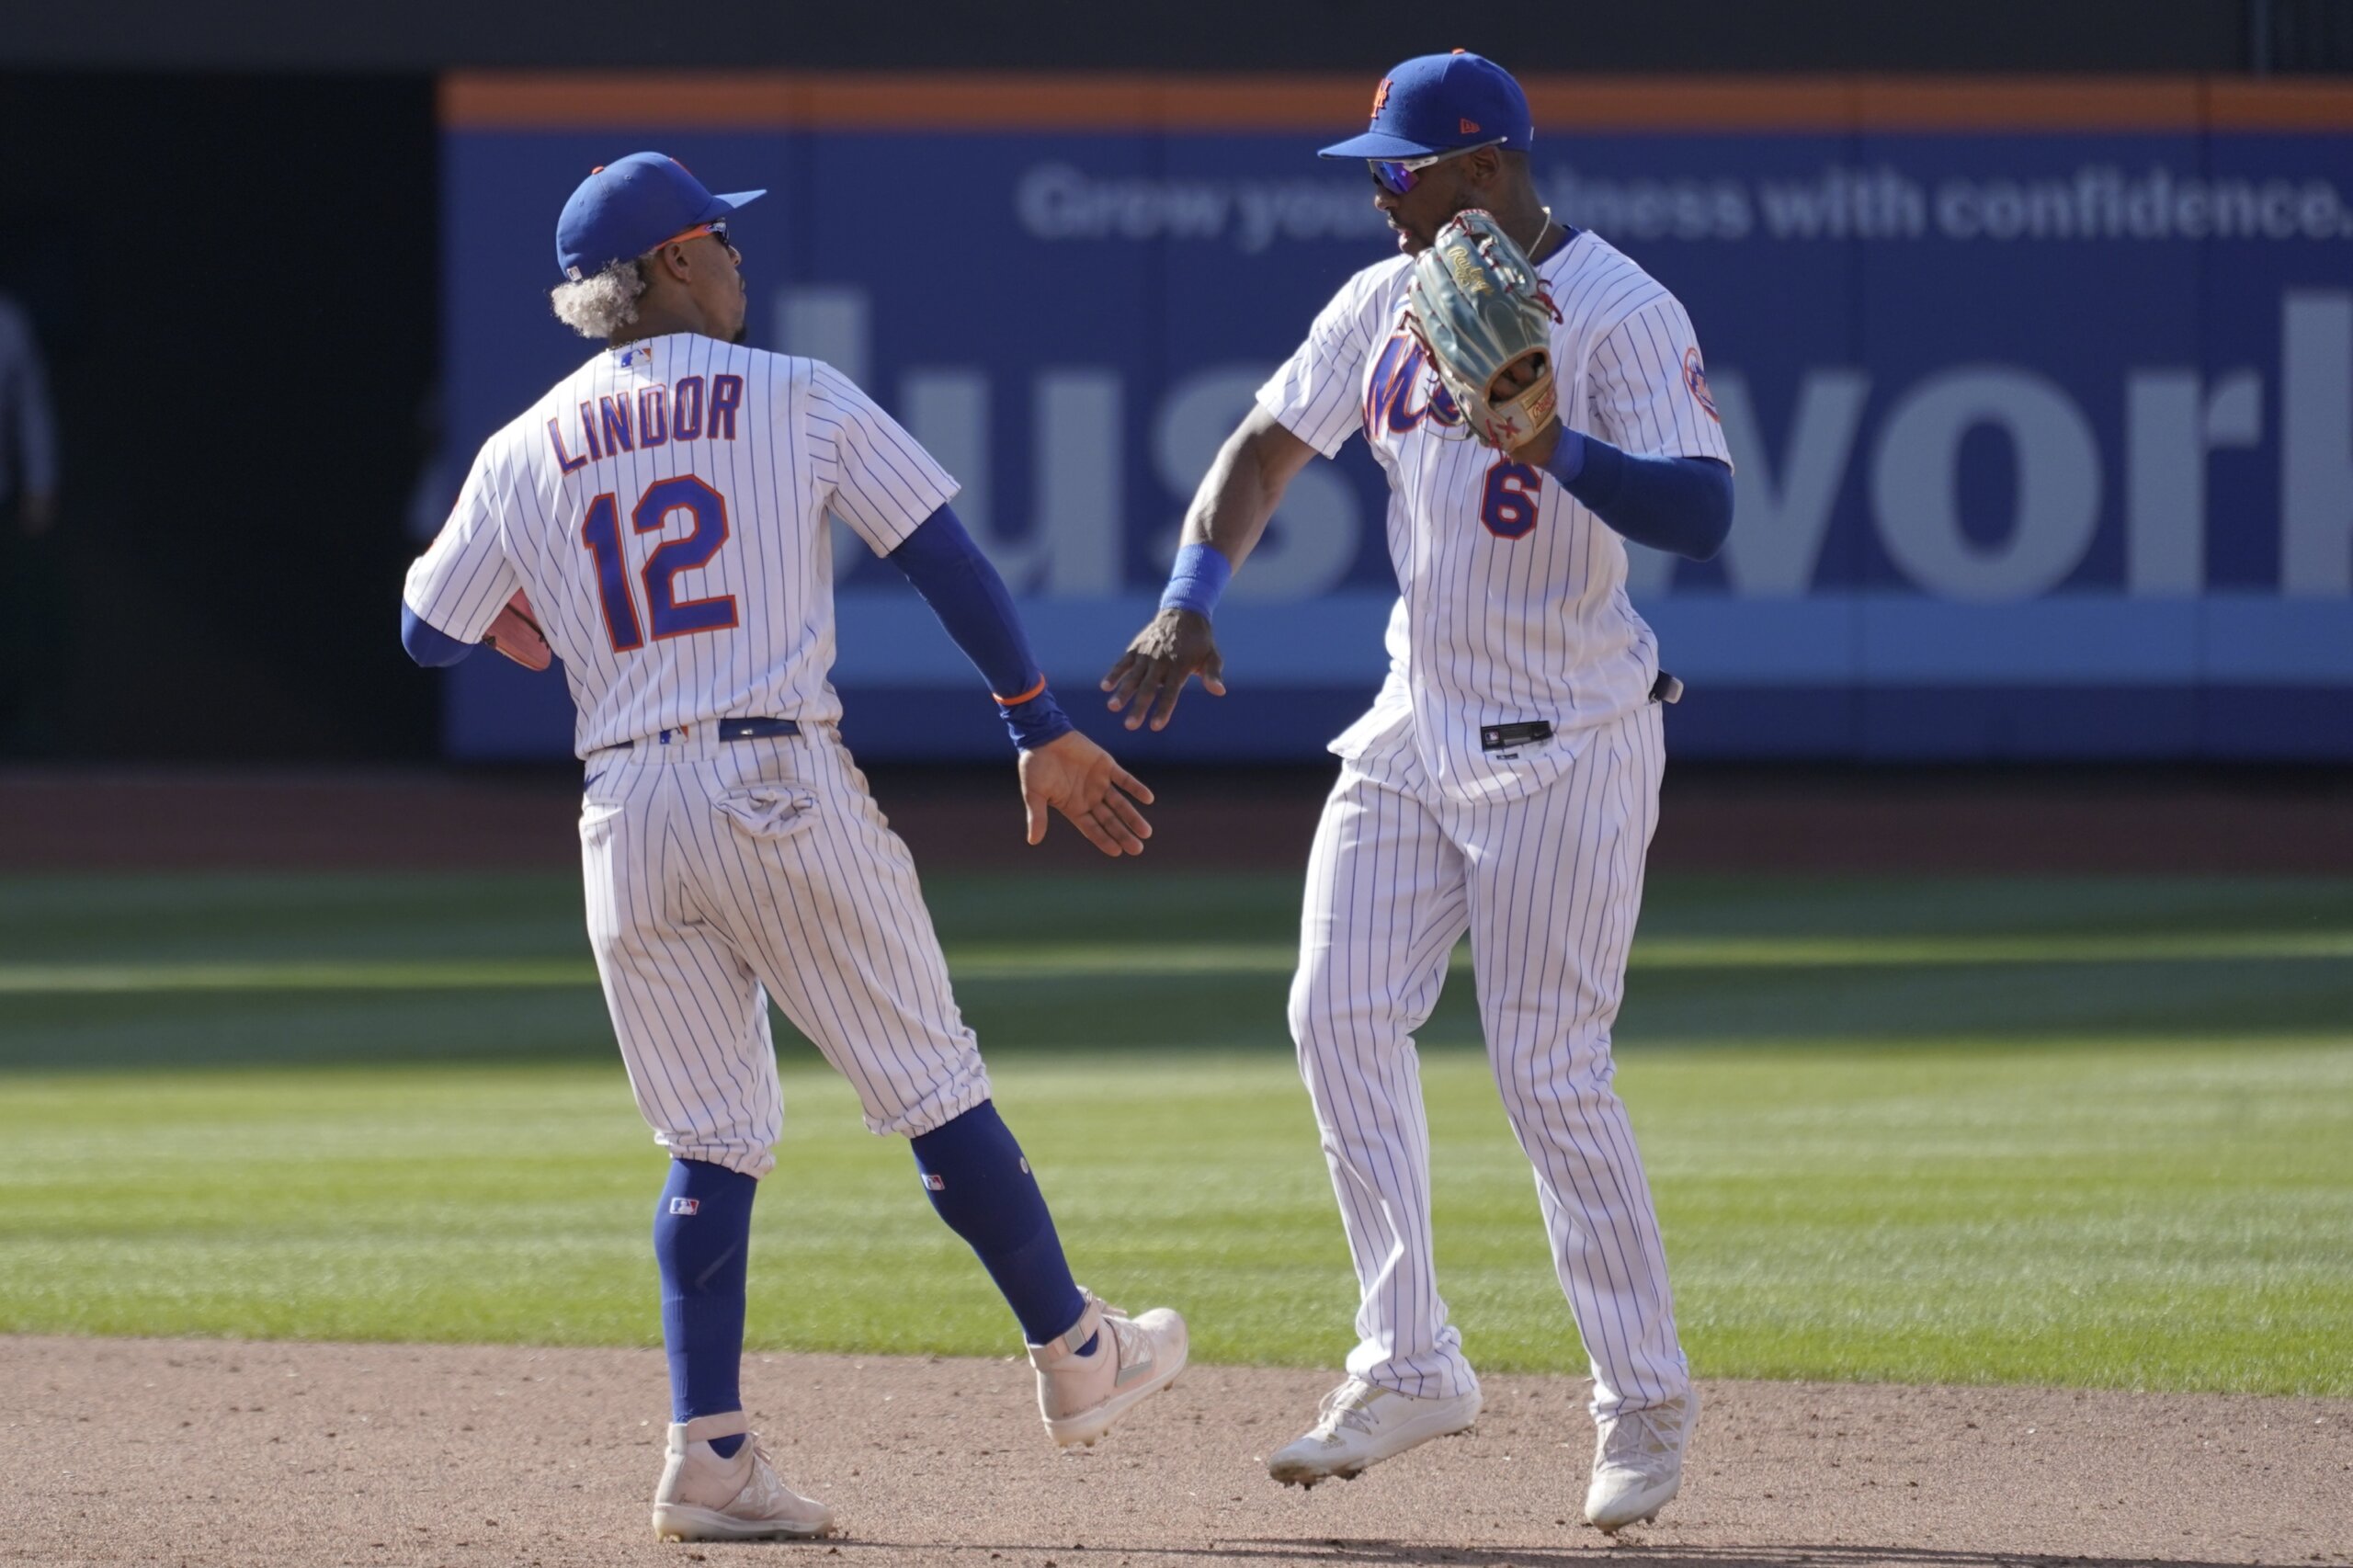 Pete Alonso homers twice to help the Mets beat the Nationals 5-1 - WTOP News